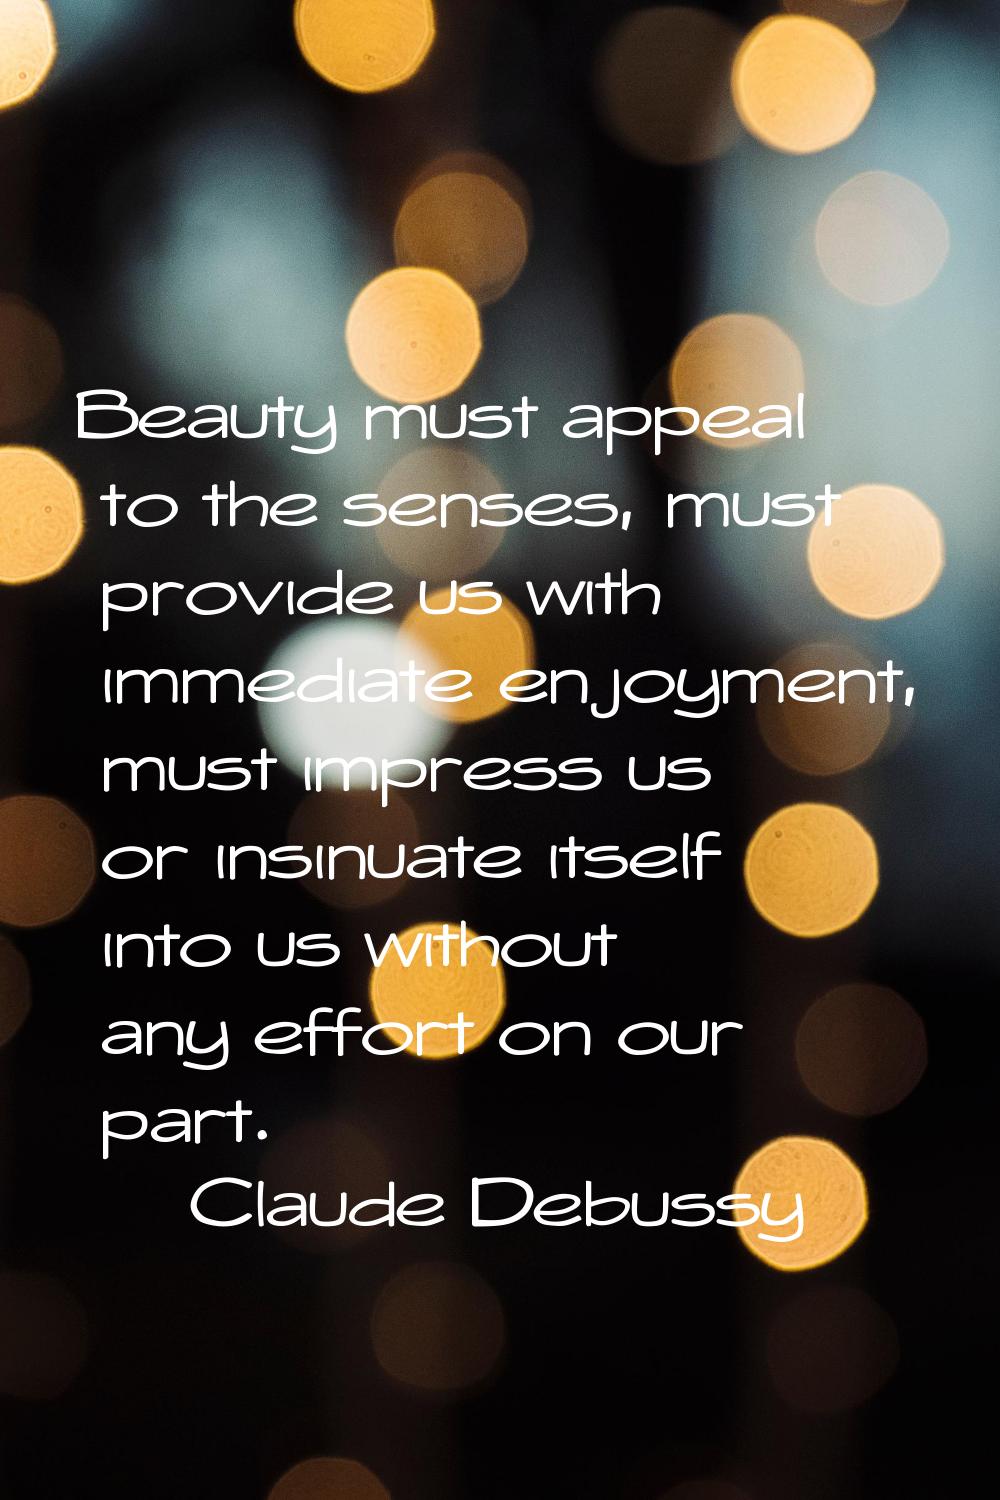 Beauty must appeal to the senses, must provide us with immediate enjoyment, must impress us or insi